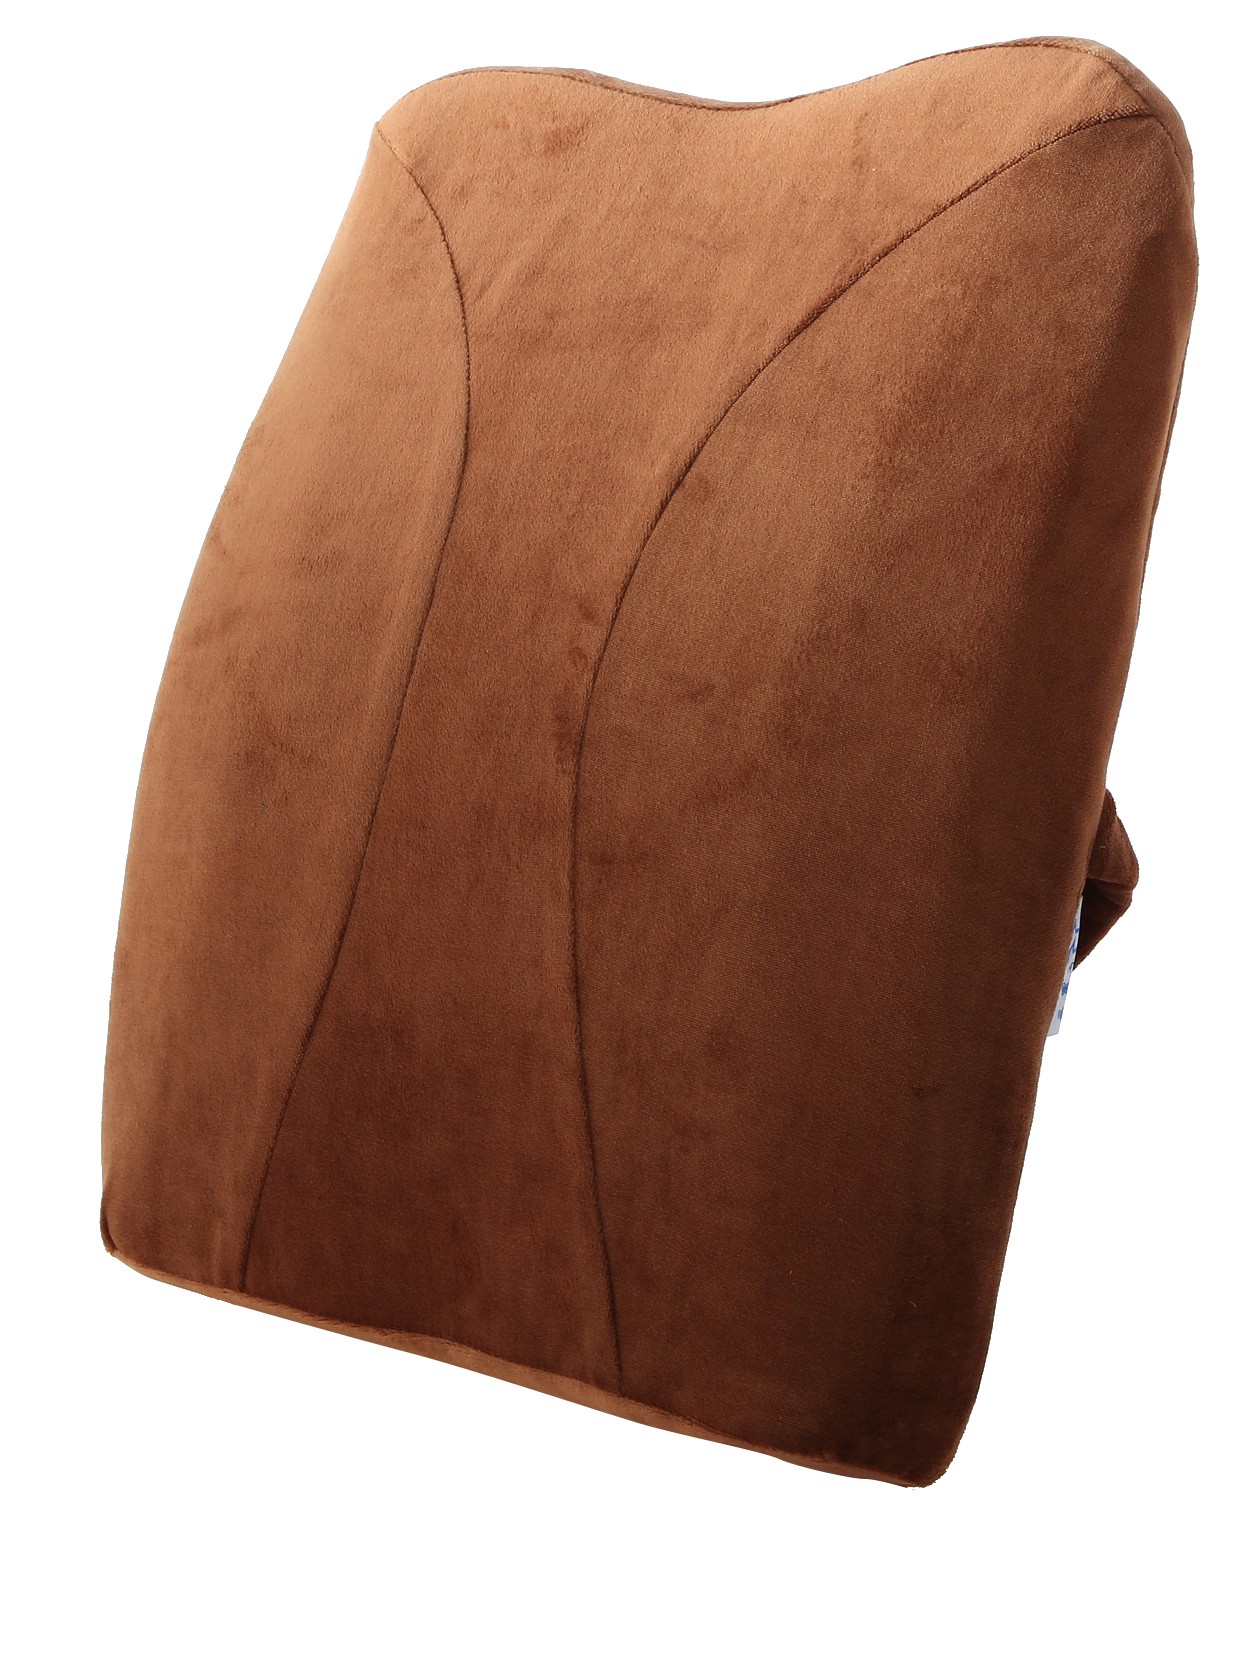 Back pillow office chair & seat cushion